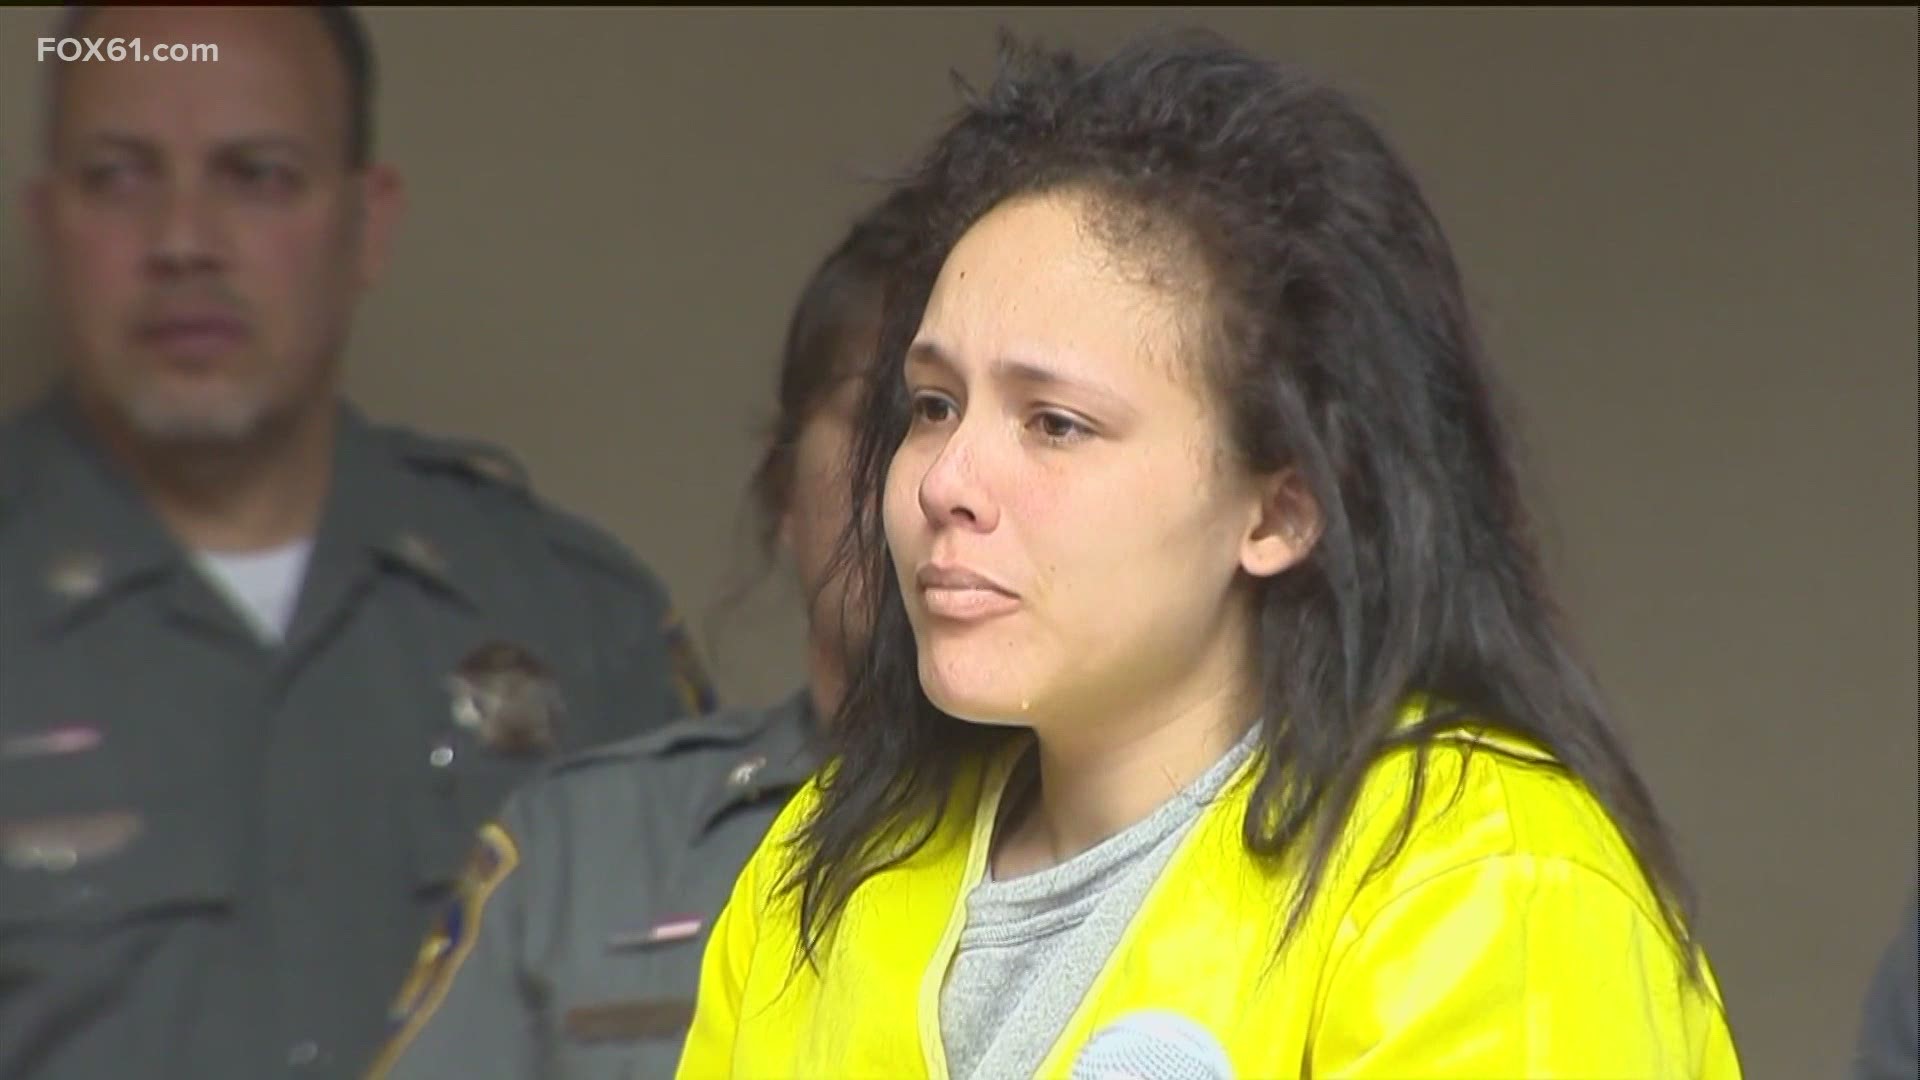 Ruth and her brother Sergio Correa were charged with the murder of three members of the Lindquist family.